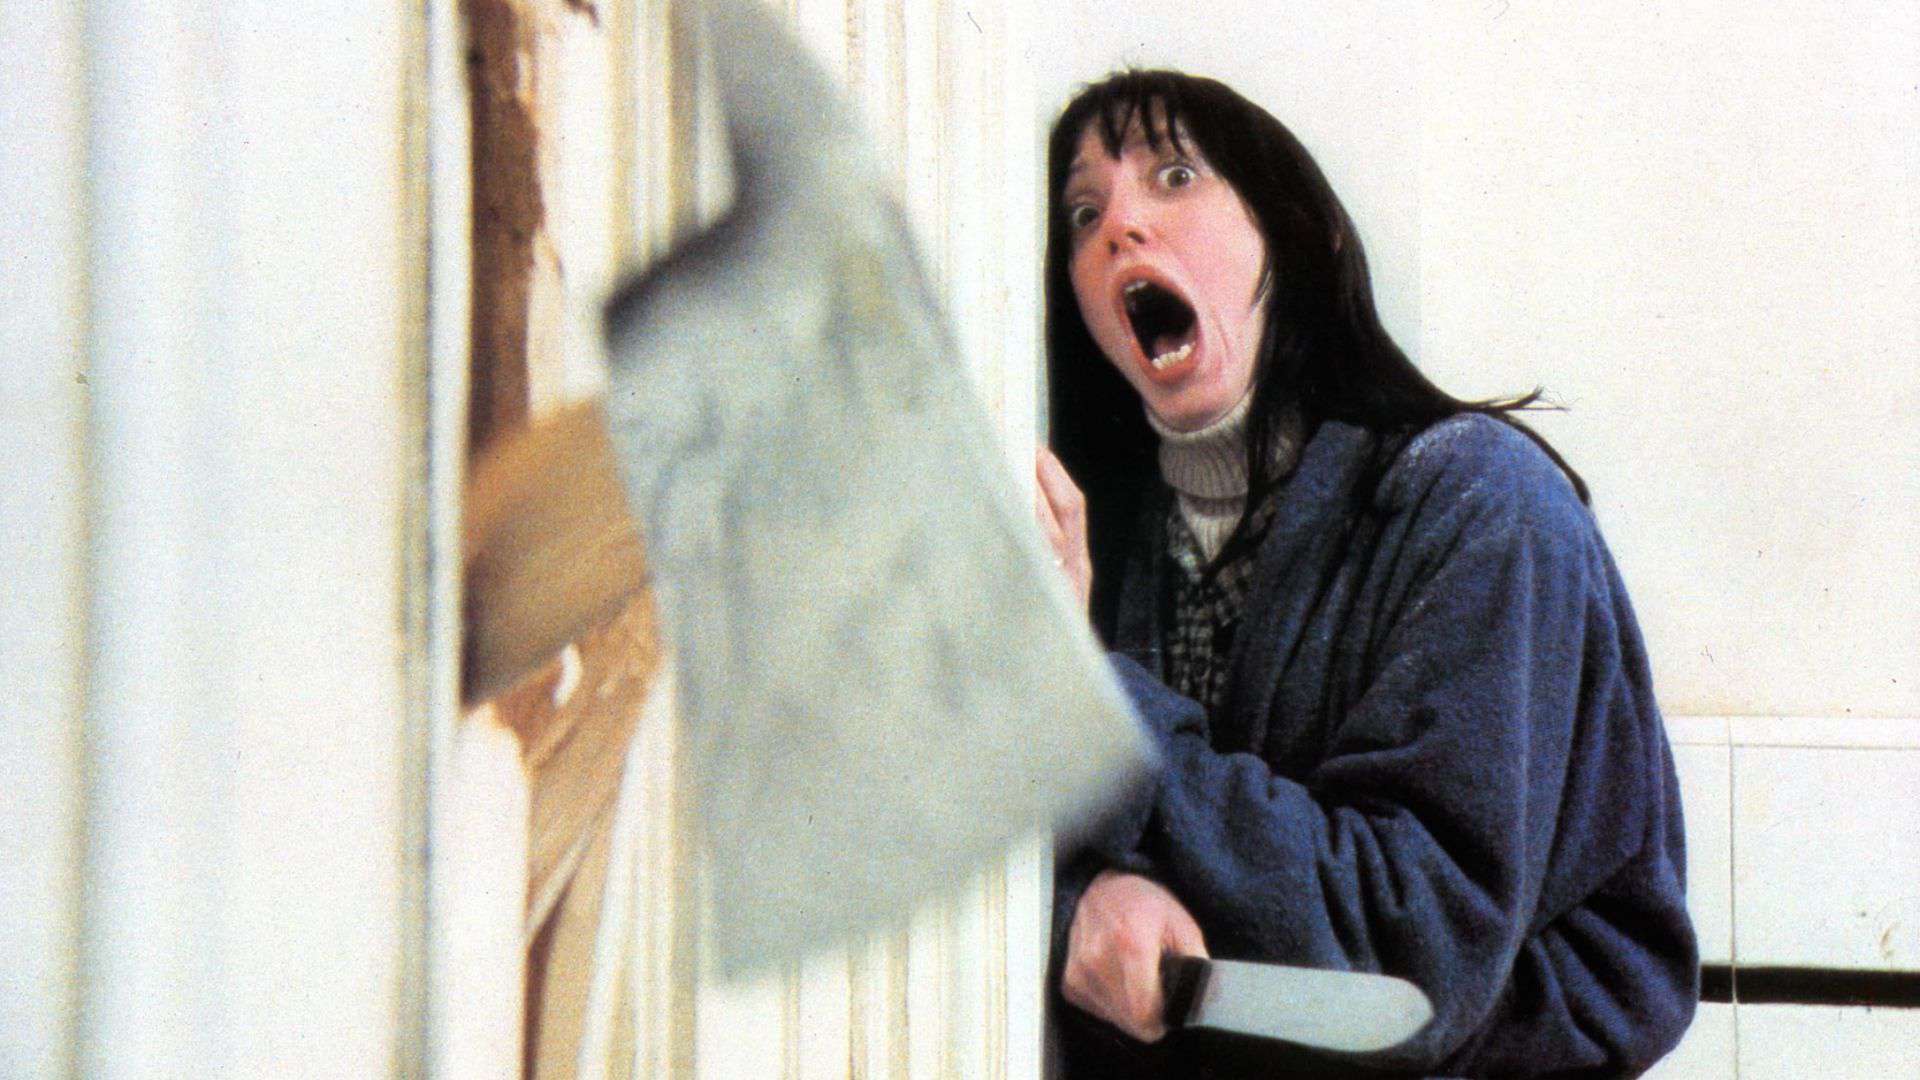 A woman screams as a hatchet breaks through a door from The Producer Circle Company.